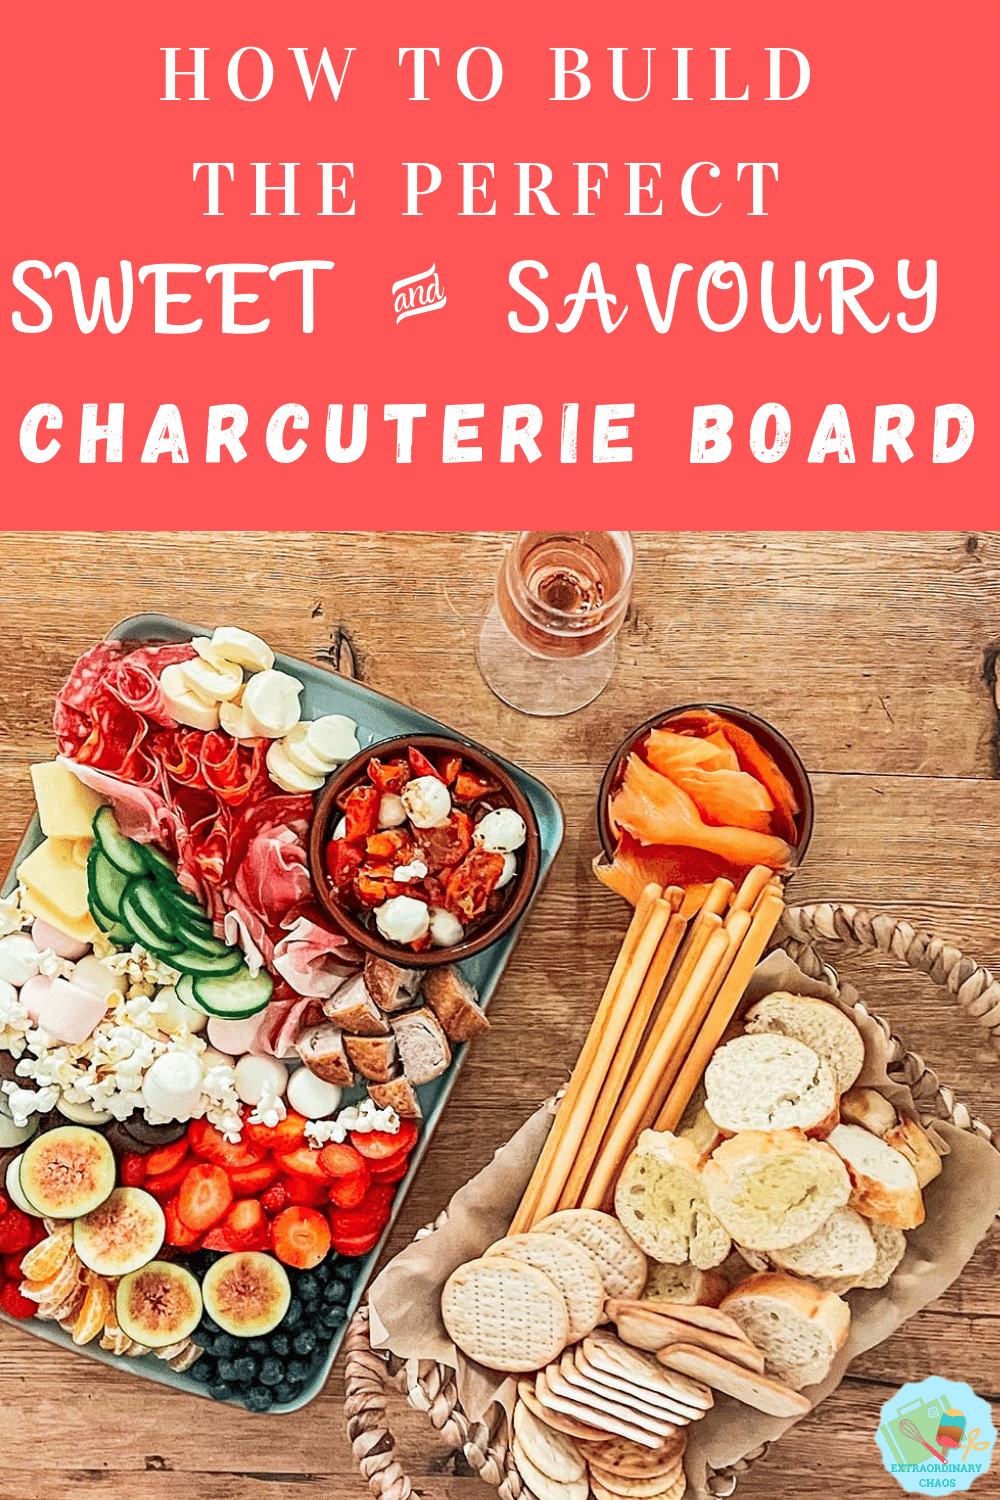 How to build the perfect charcuterie board to suit the whole family when making a family sweet and savoury sharing platter